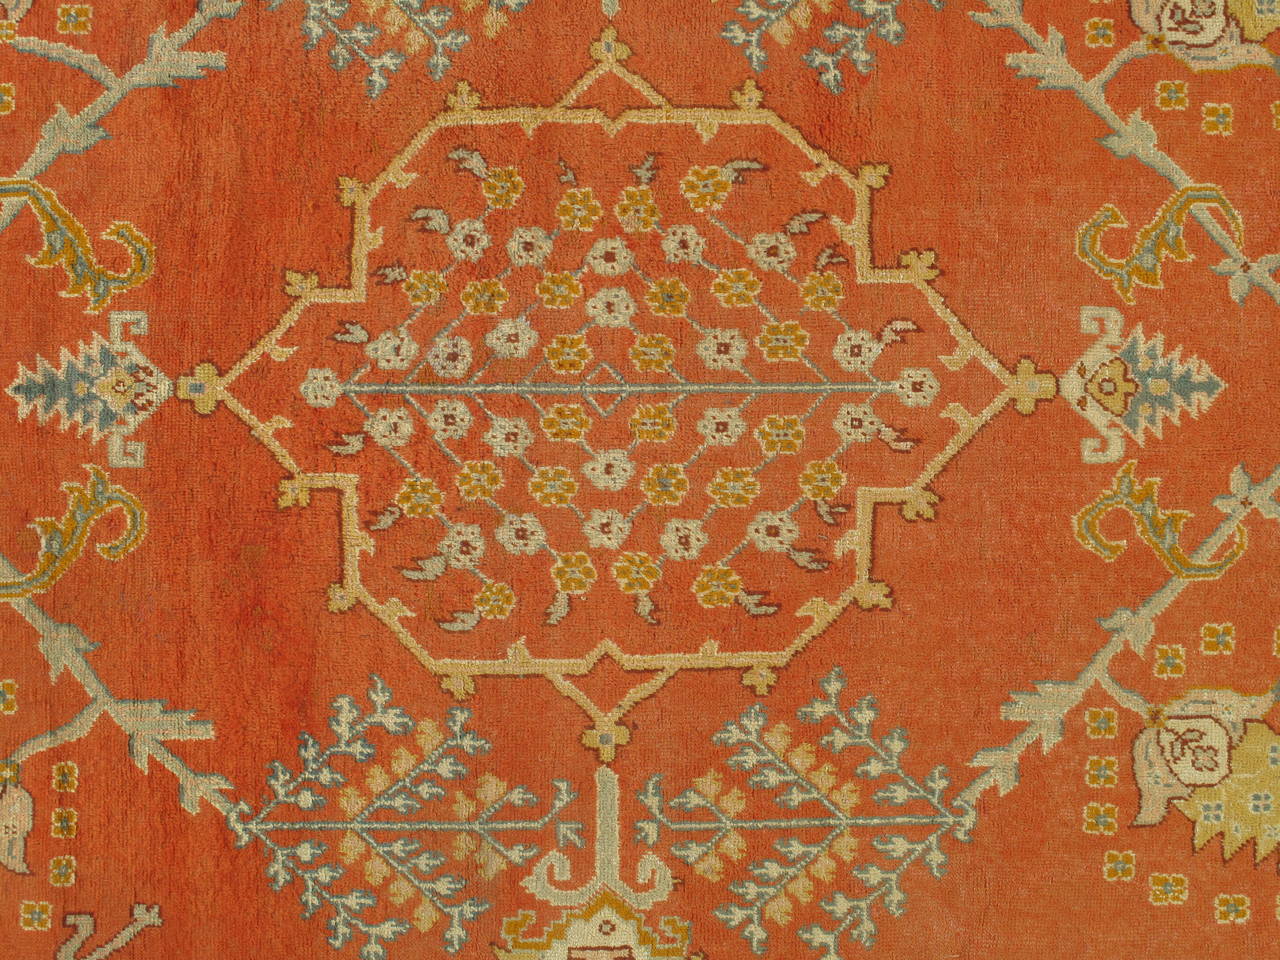 Turkish carpet from Oushak with a combination of soft colors on a center medallion design. Finely woven, having the most superb wool found in the mountains of Anatolia.
Measures: 16'2